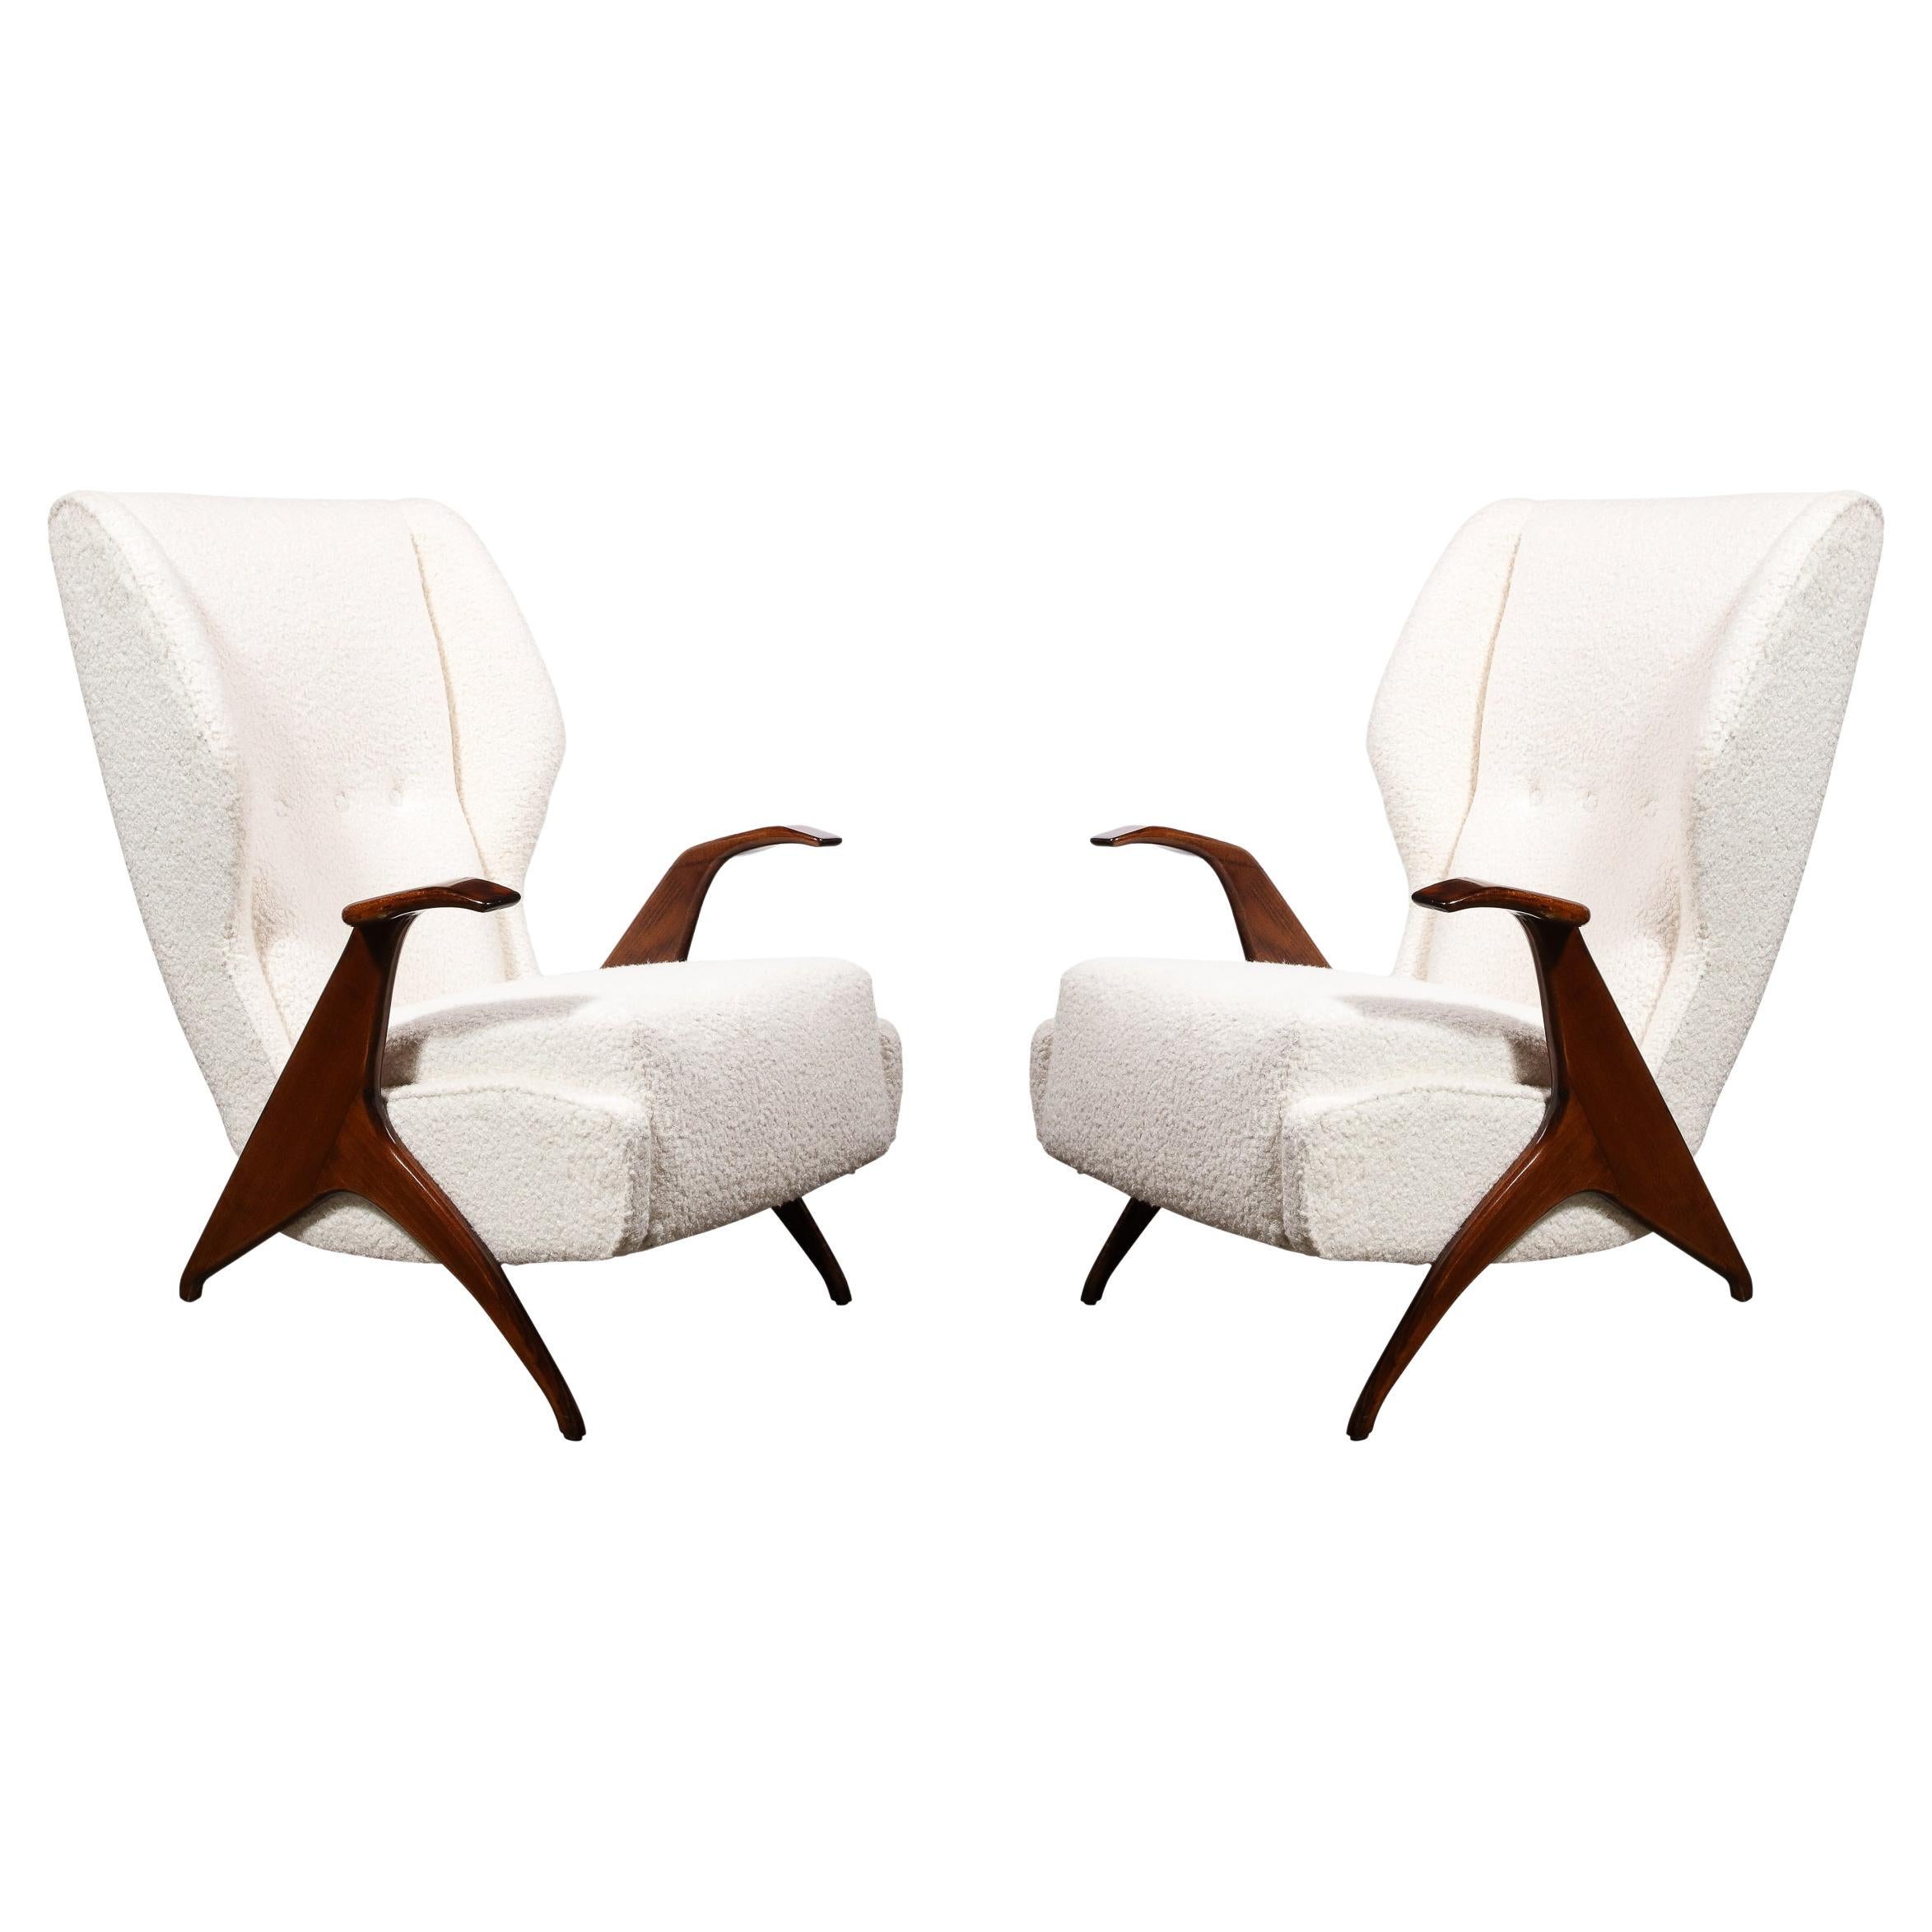 Mid-Century Modernist Sculptural Walnut Arm Chairs in Holly Hunt Boucle Fabric For Sale